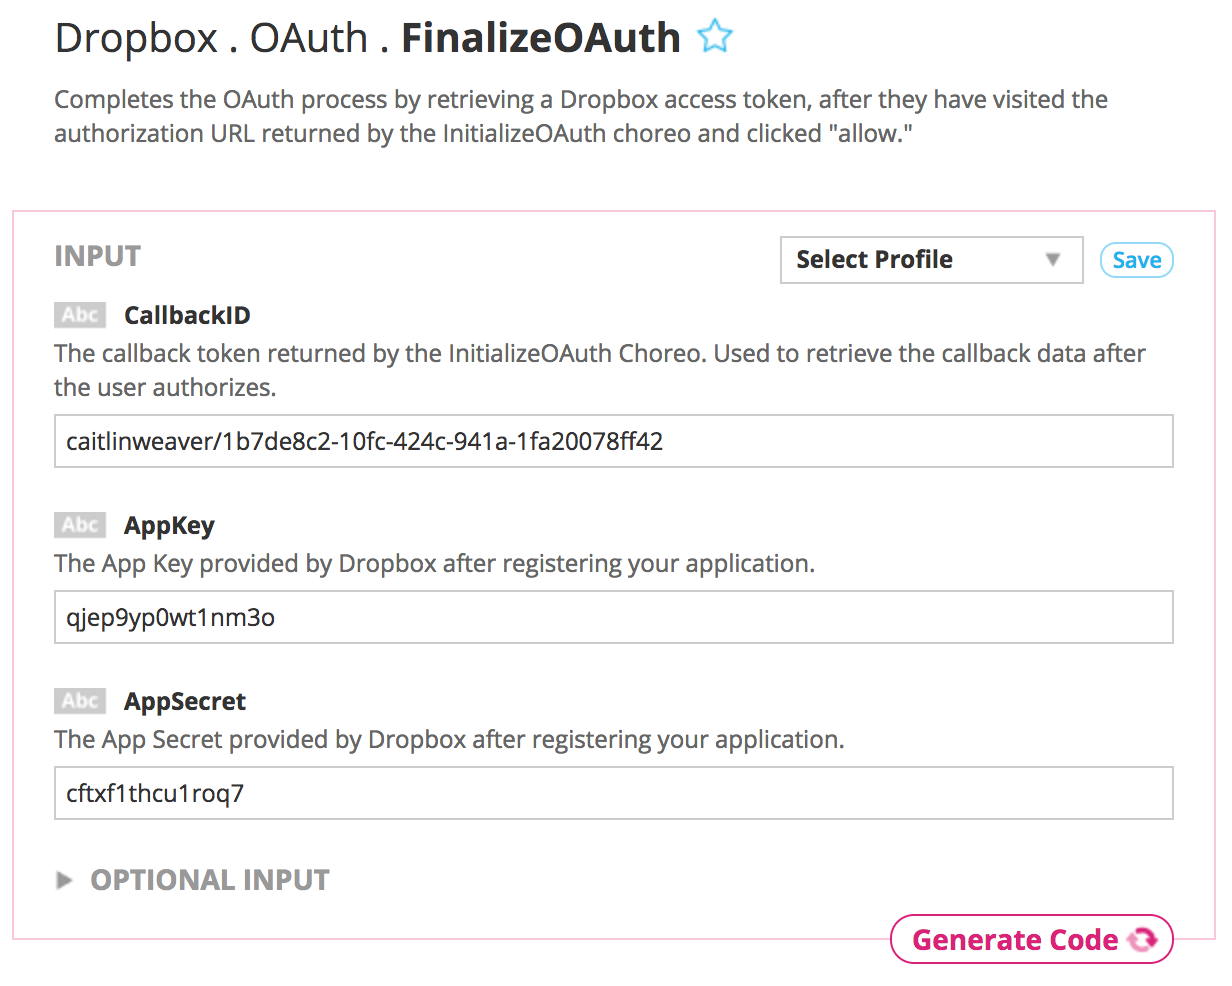 Required inputs for Finalize OAuth